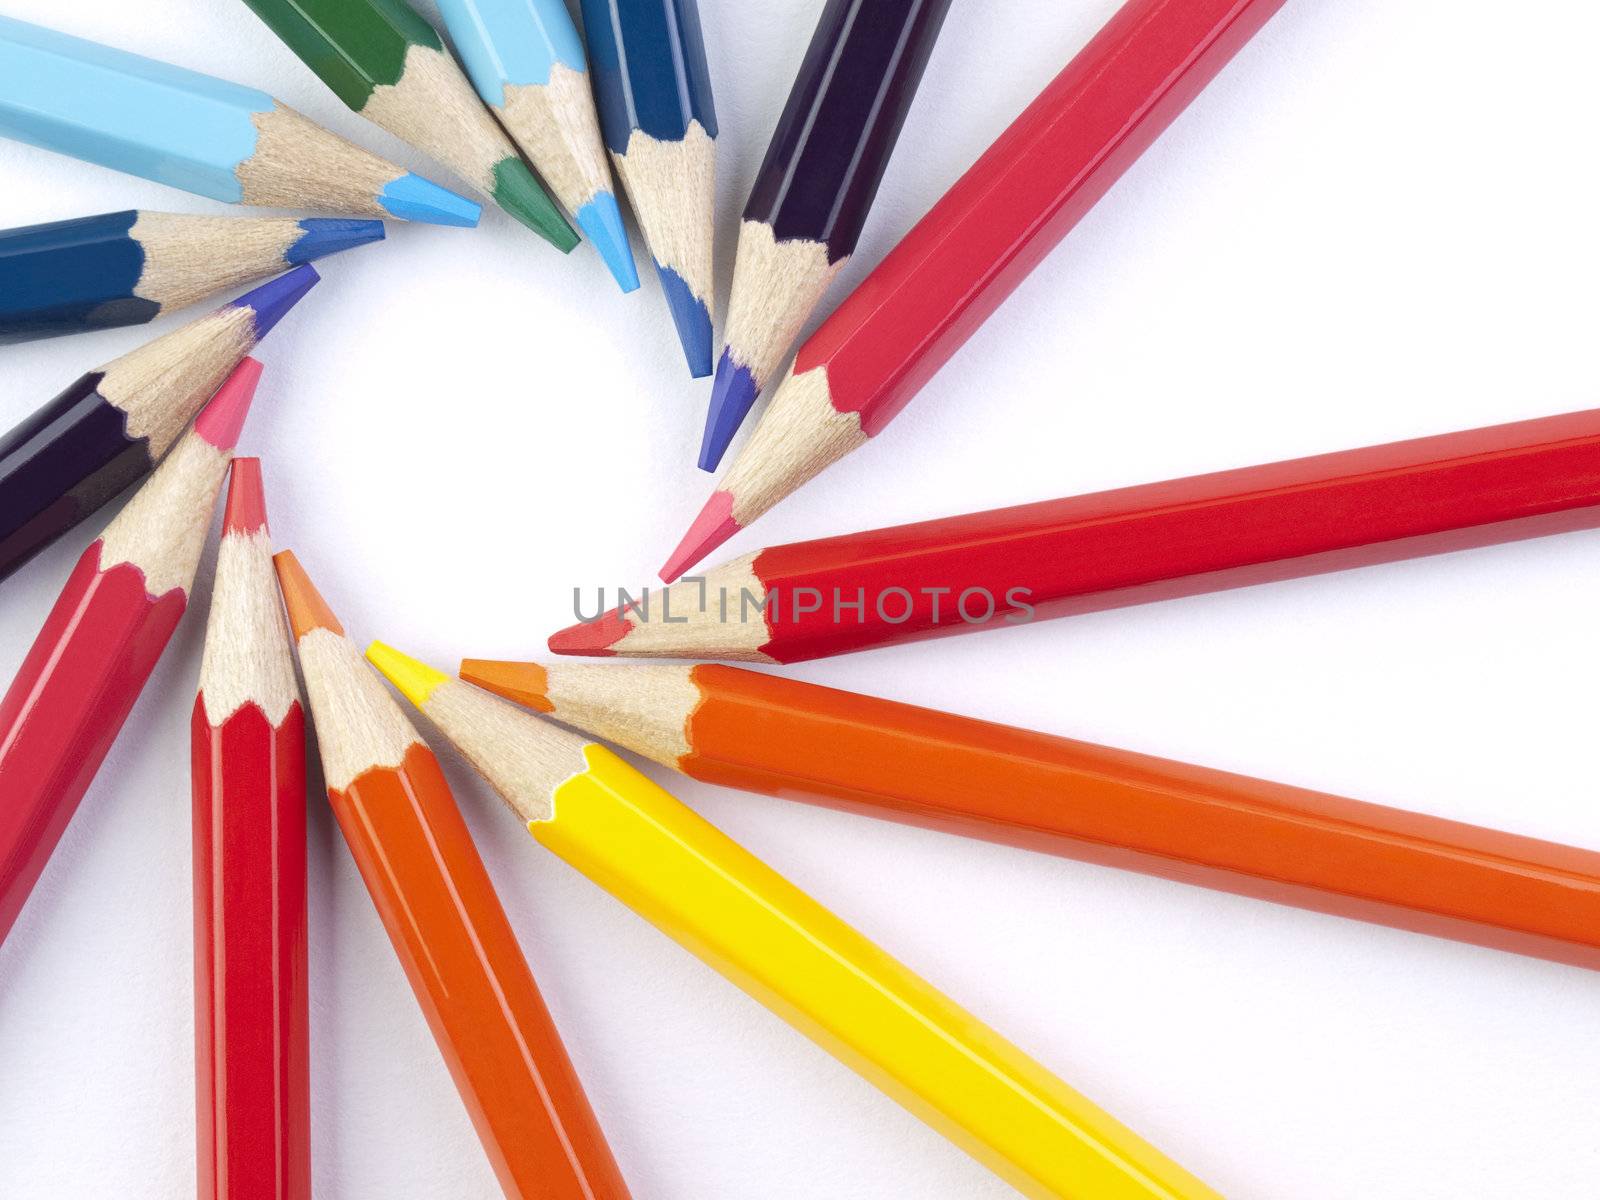 A circle formed by the points of several colored pencils.